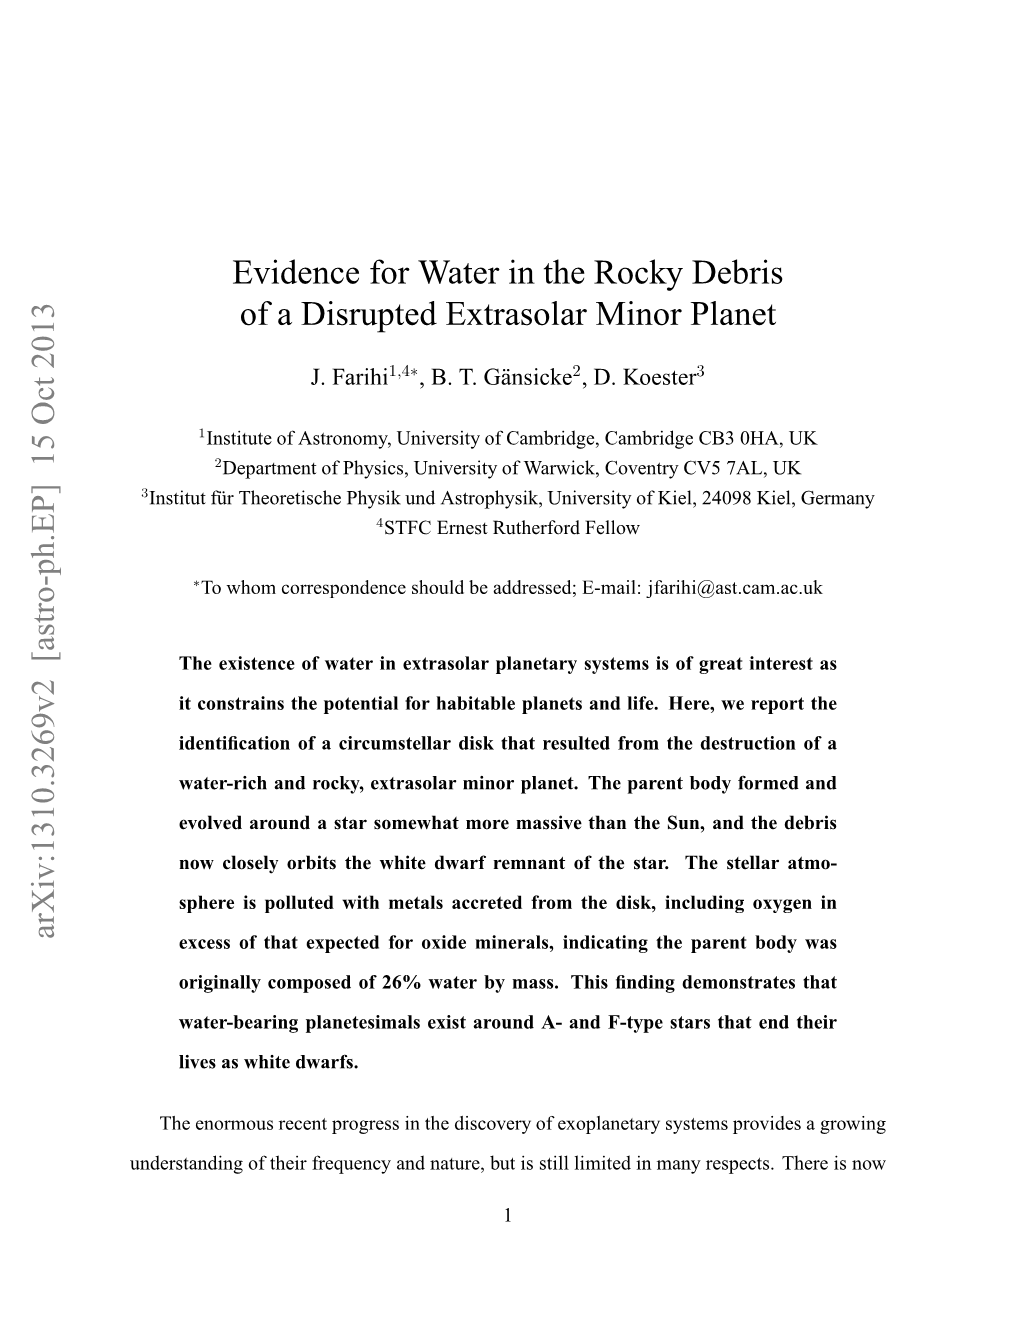 Evidence for Water in the Rocky Debris of a Disrupted Extrasolar Minor Planet